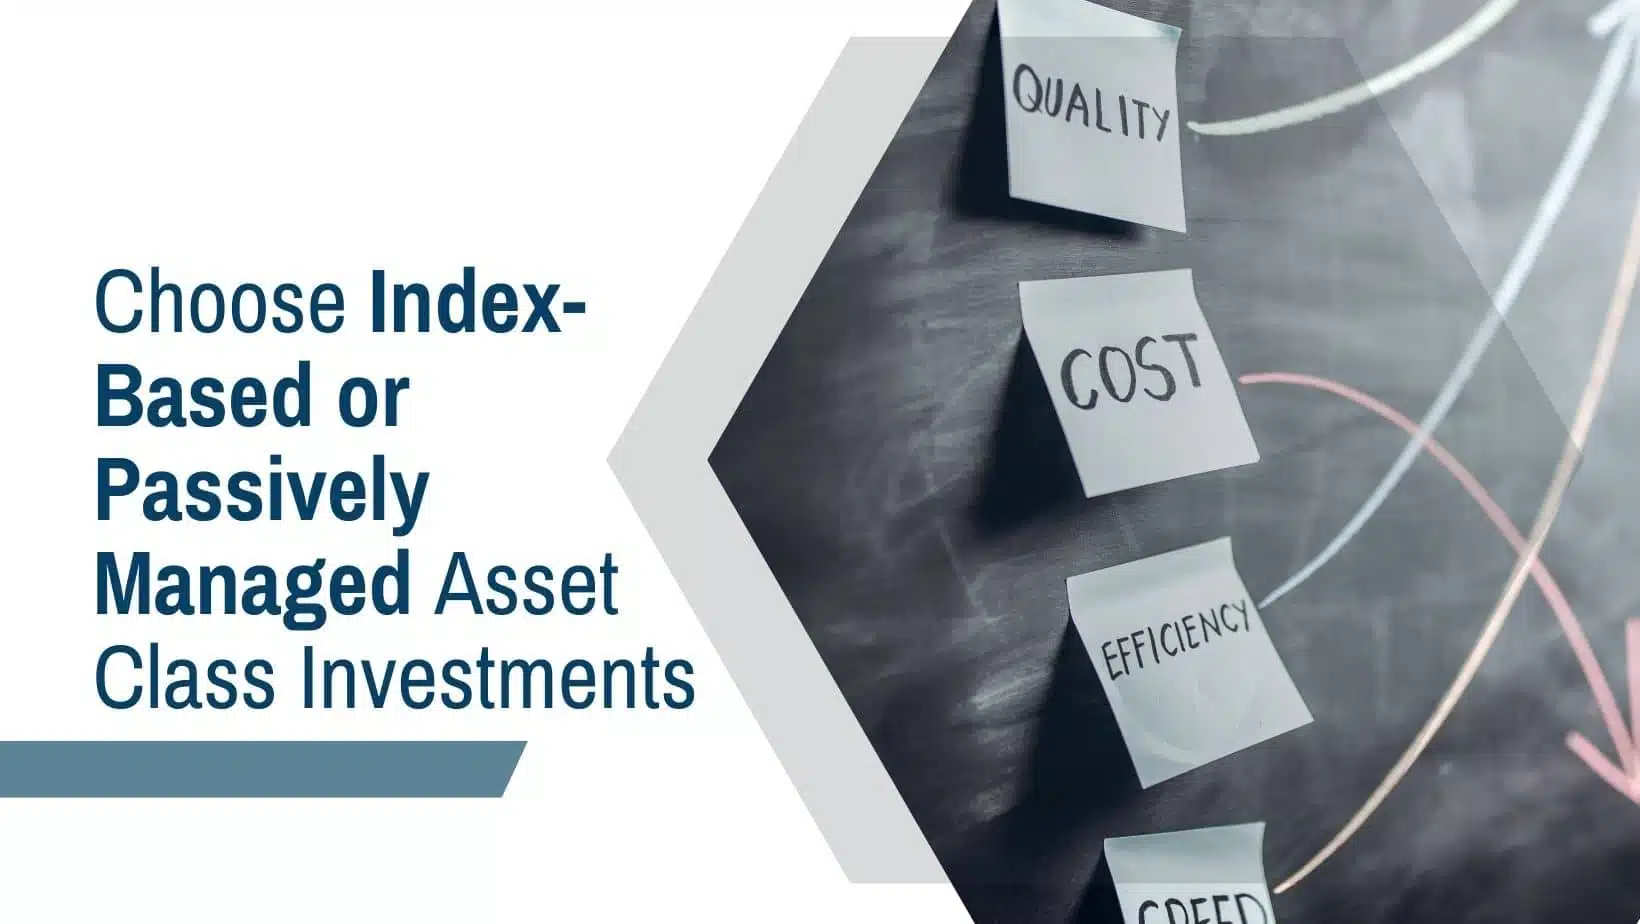 Choose Index-Based or Passively Managed Asset Class Investments